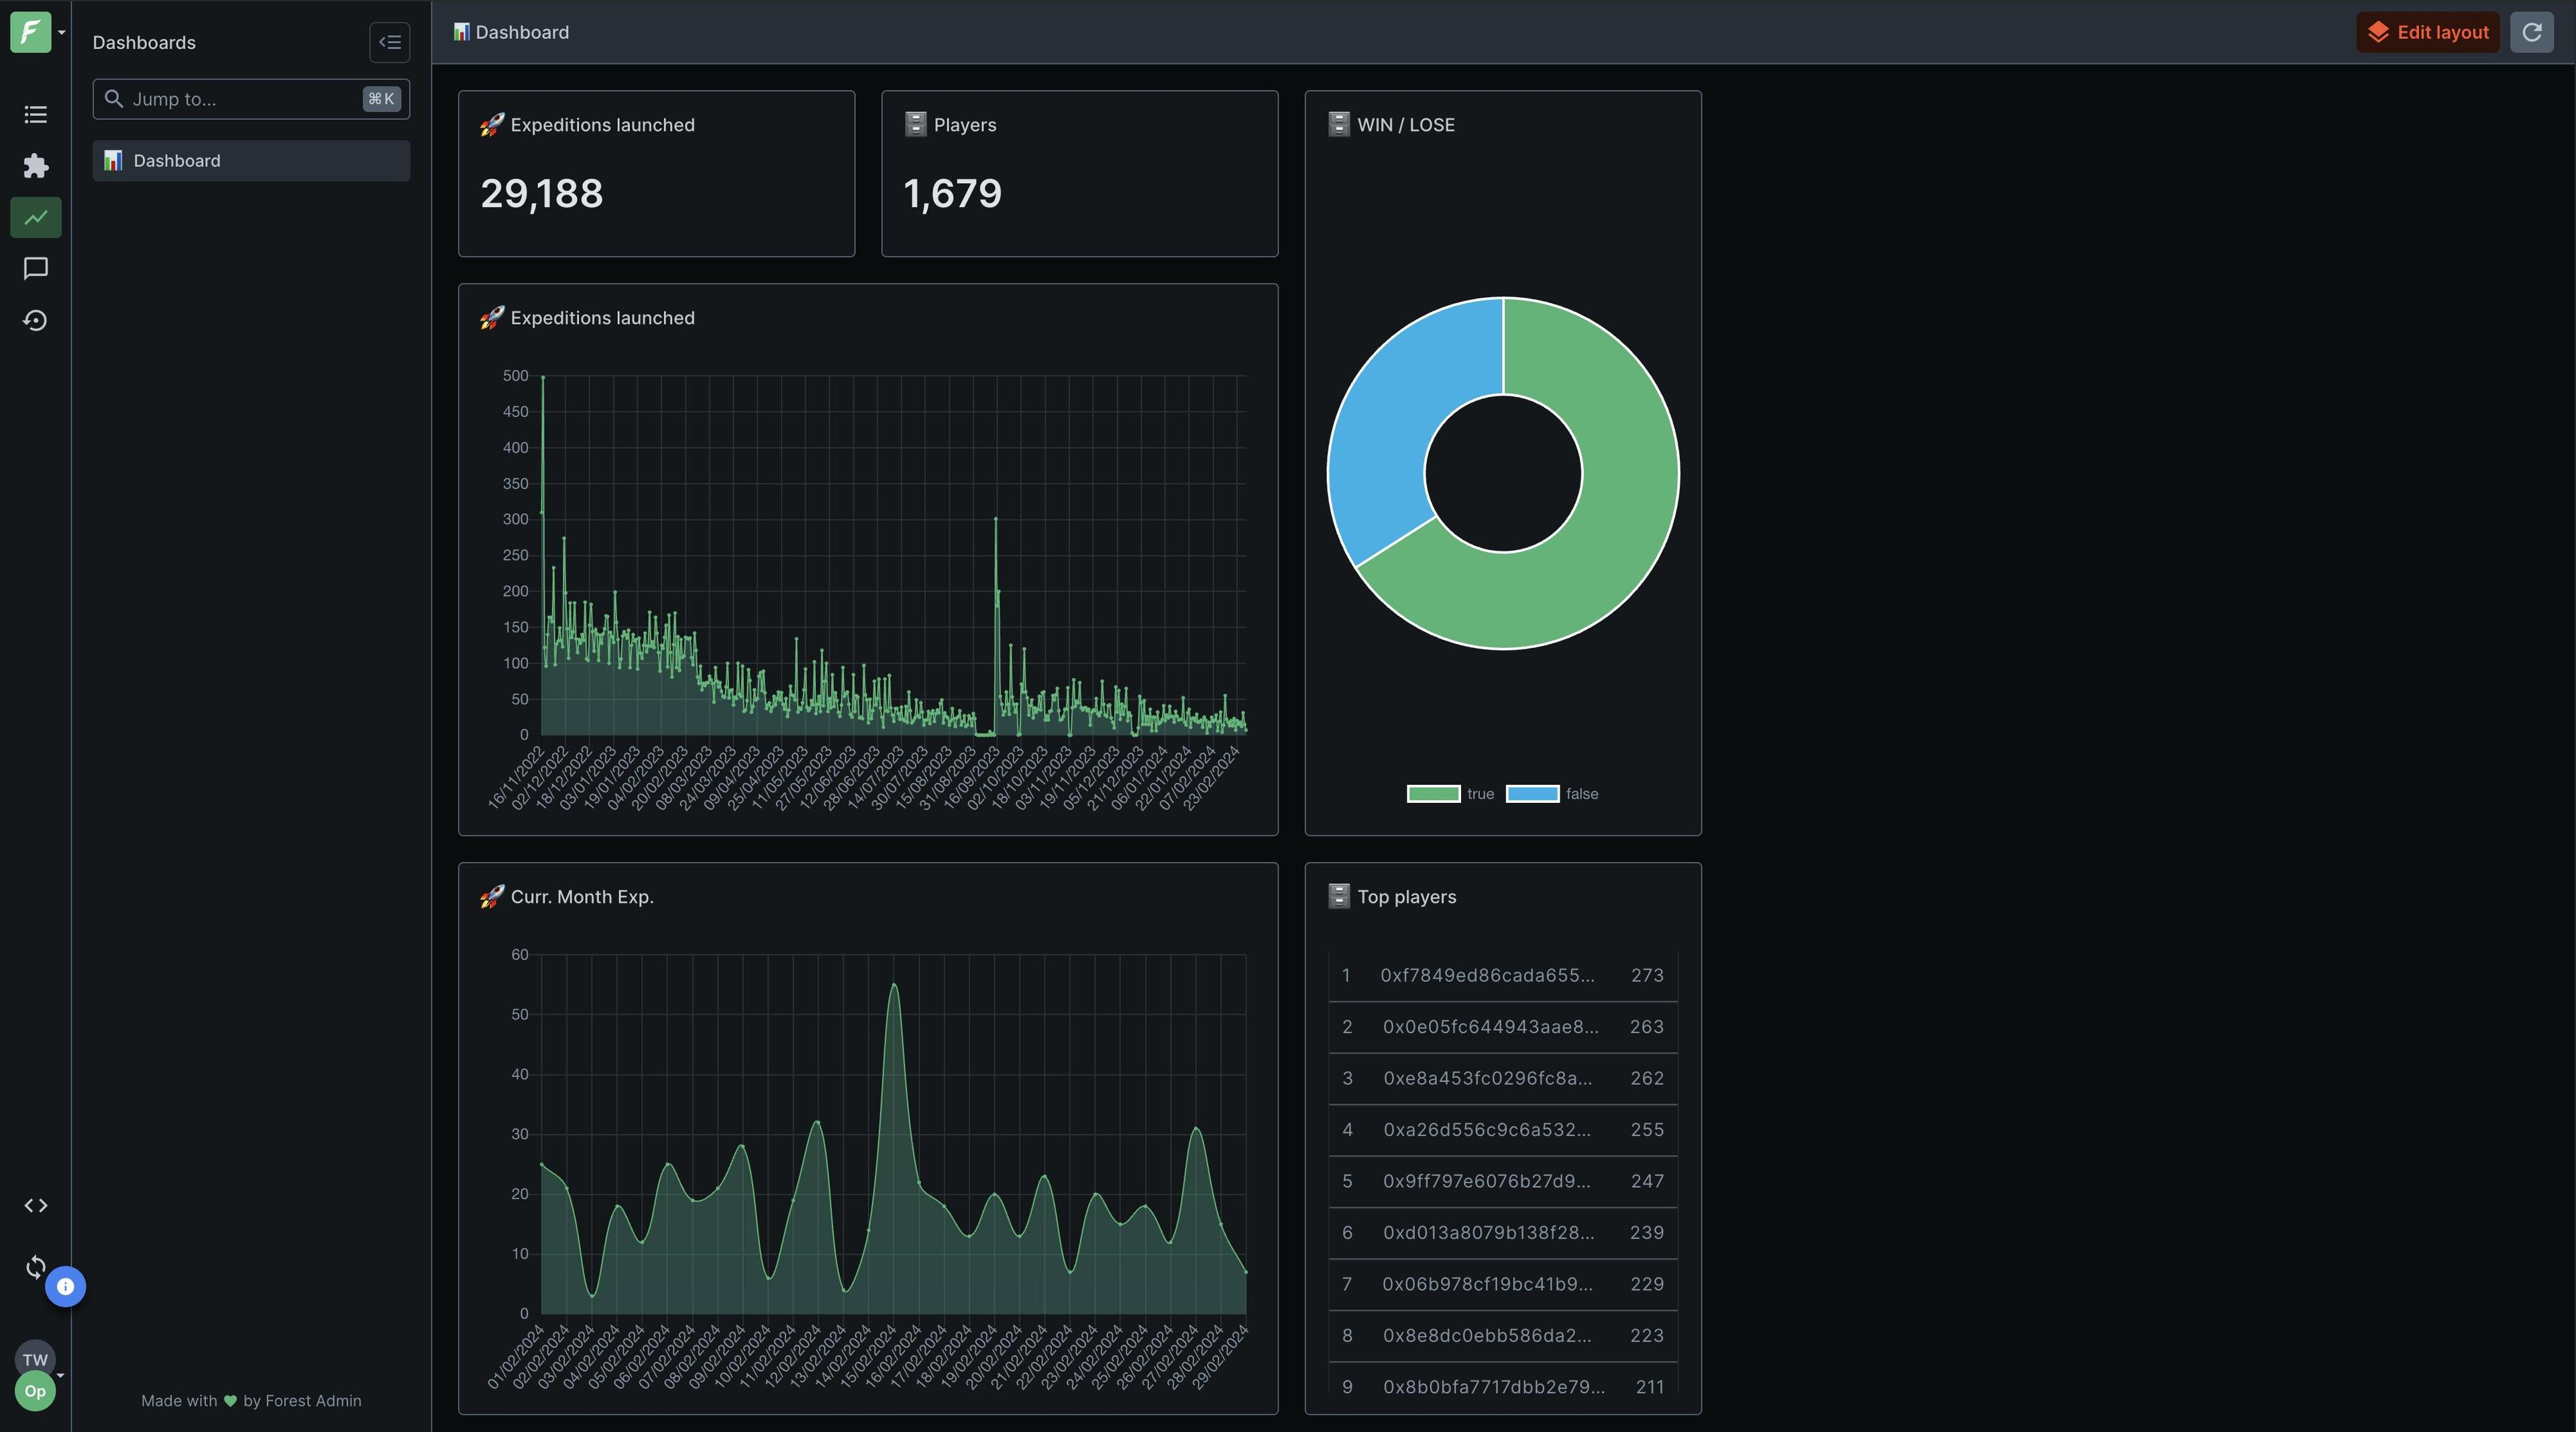 Preview of a dashboard on the Forest Admin interface